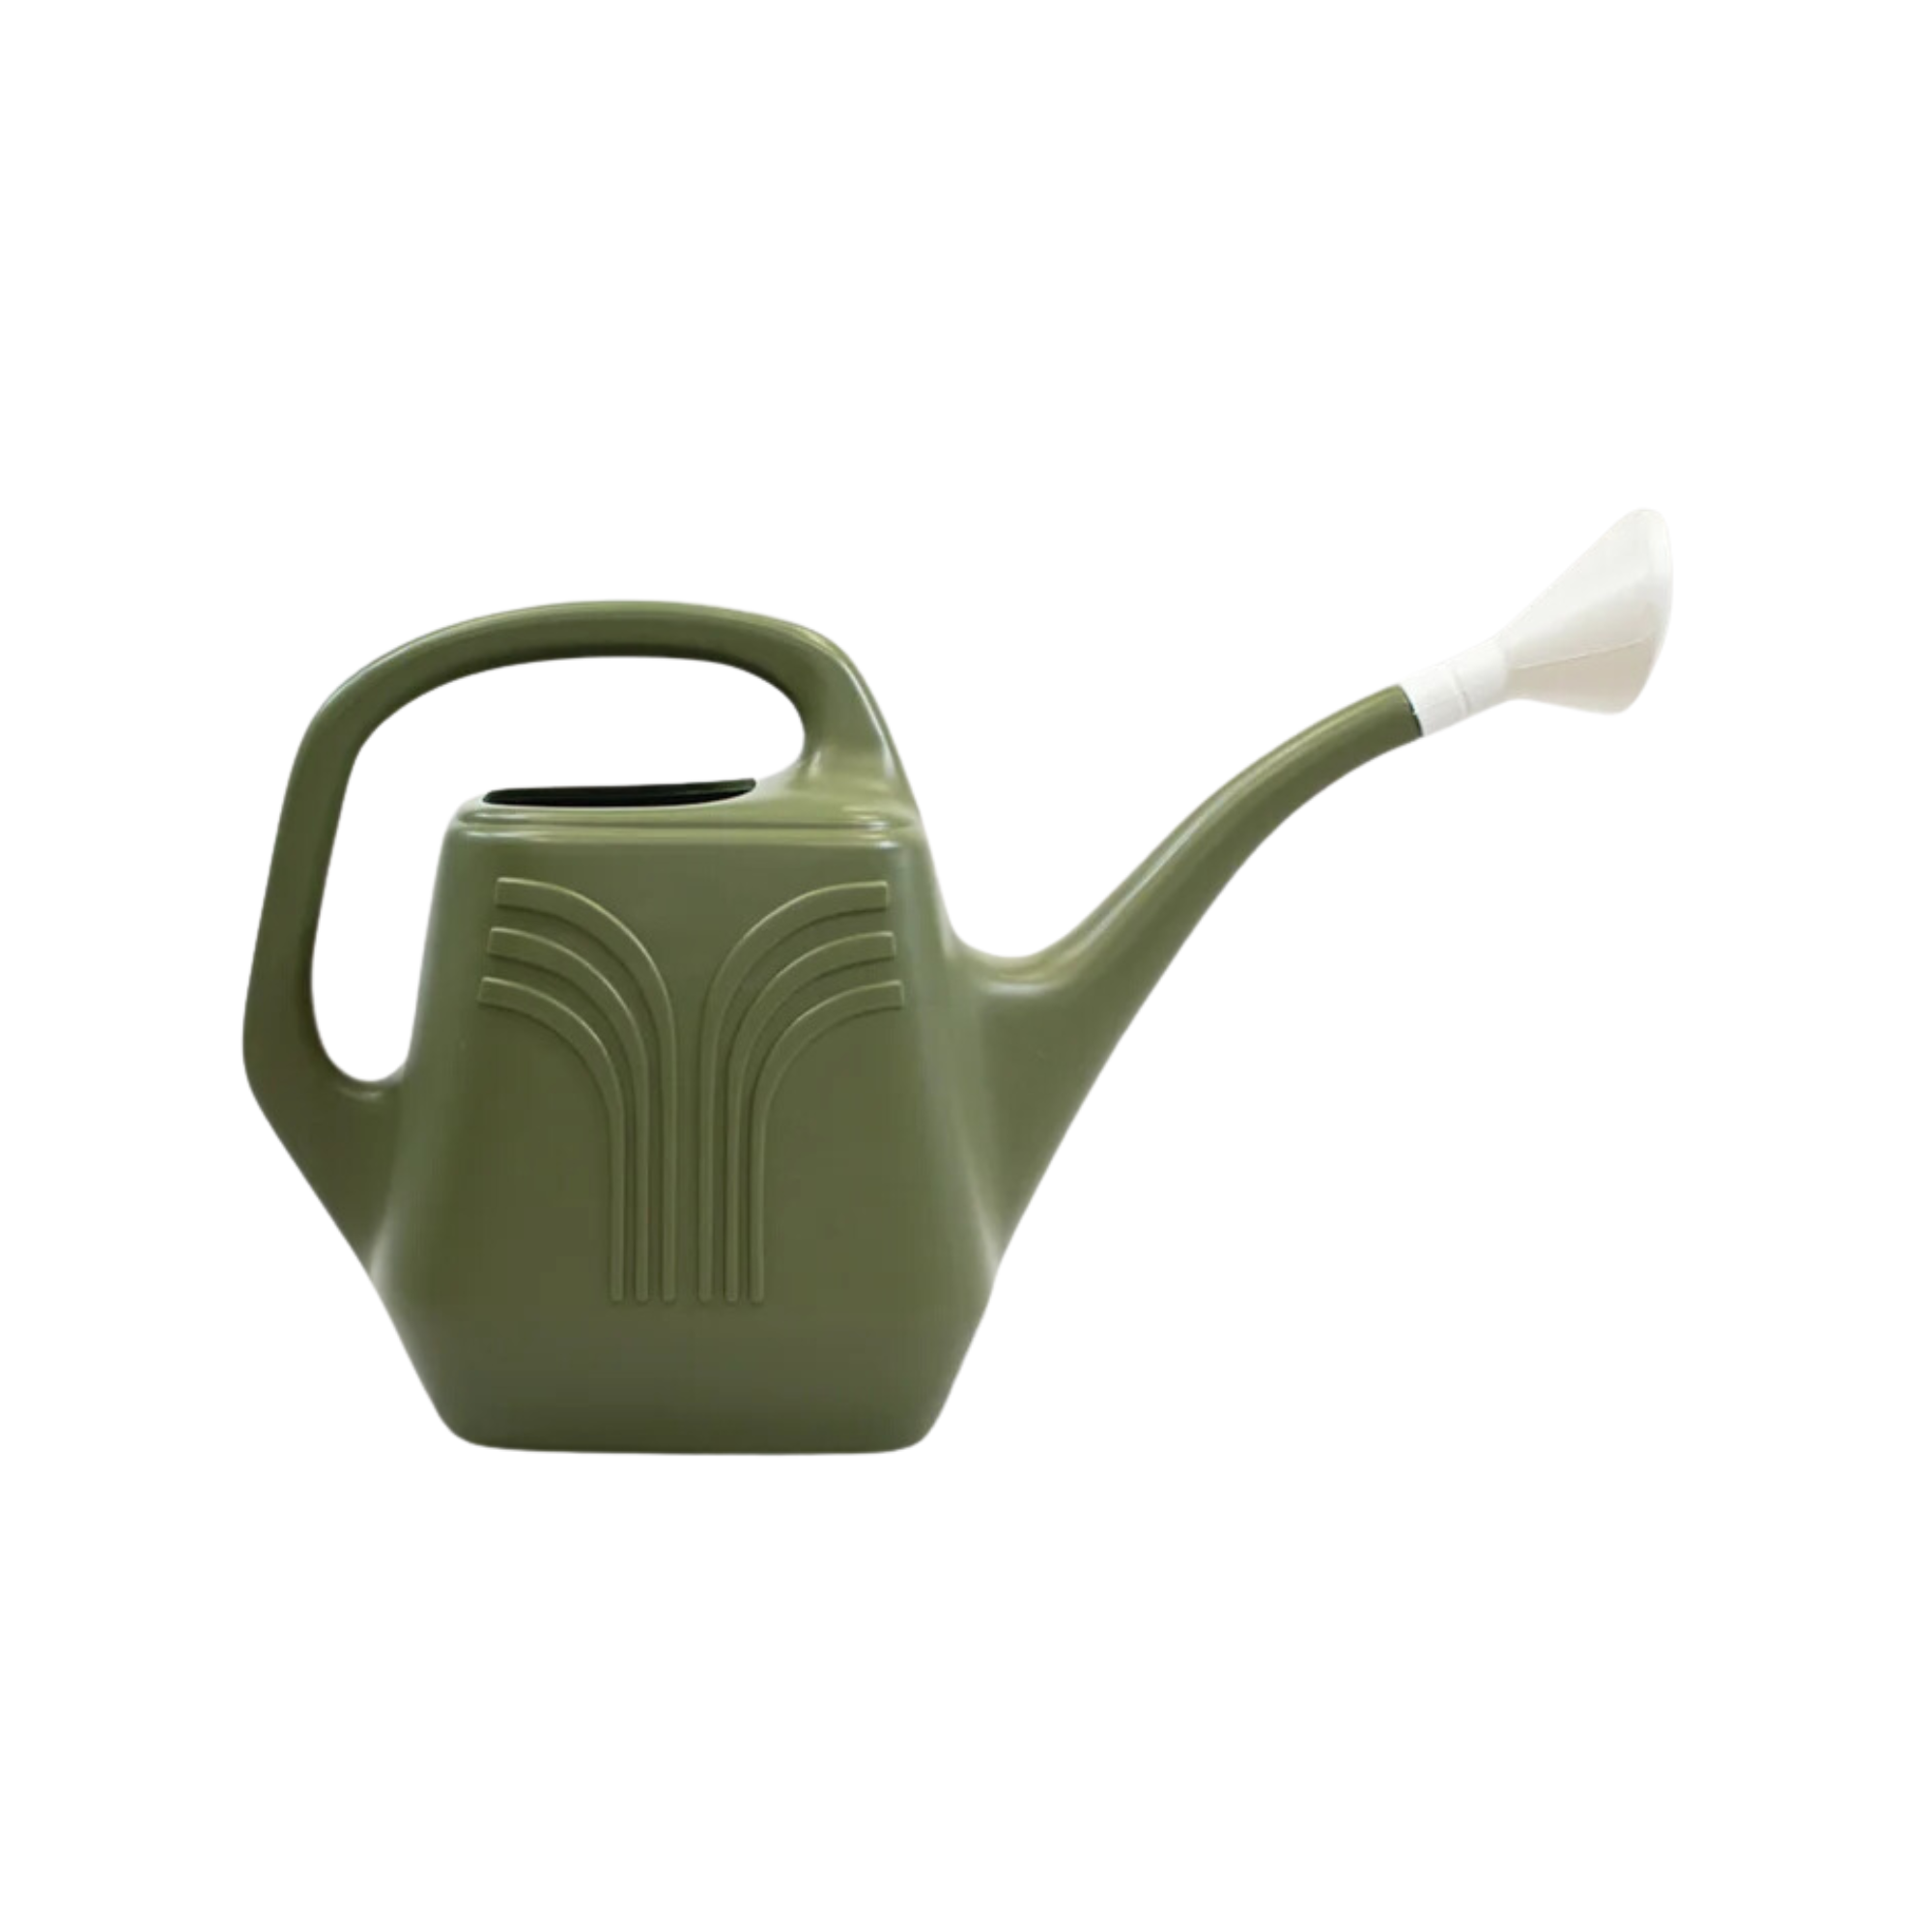 A green watering can